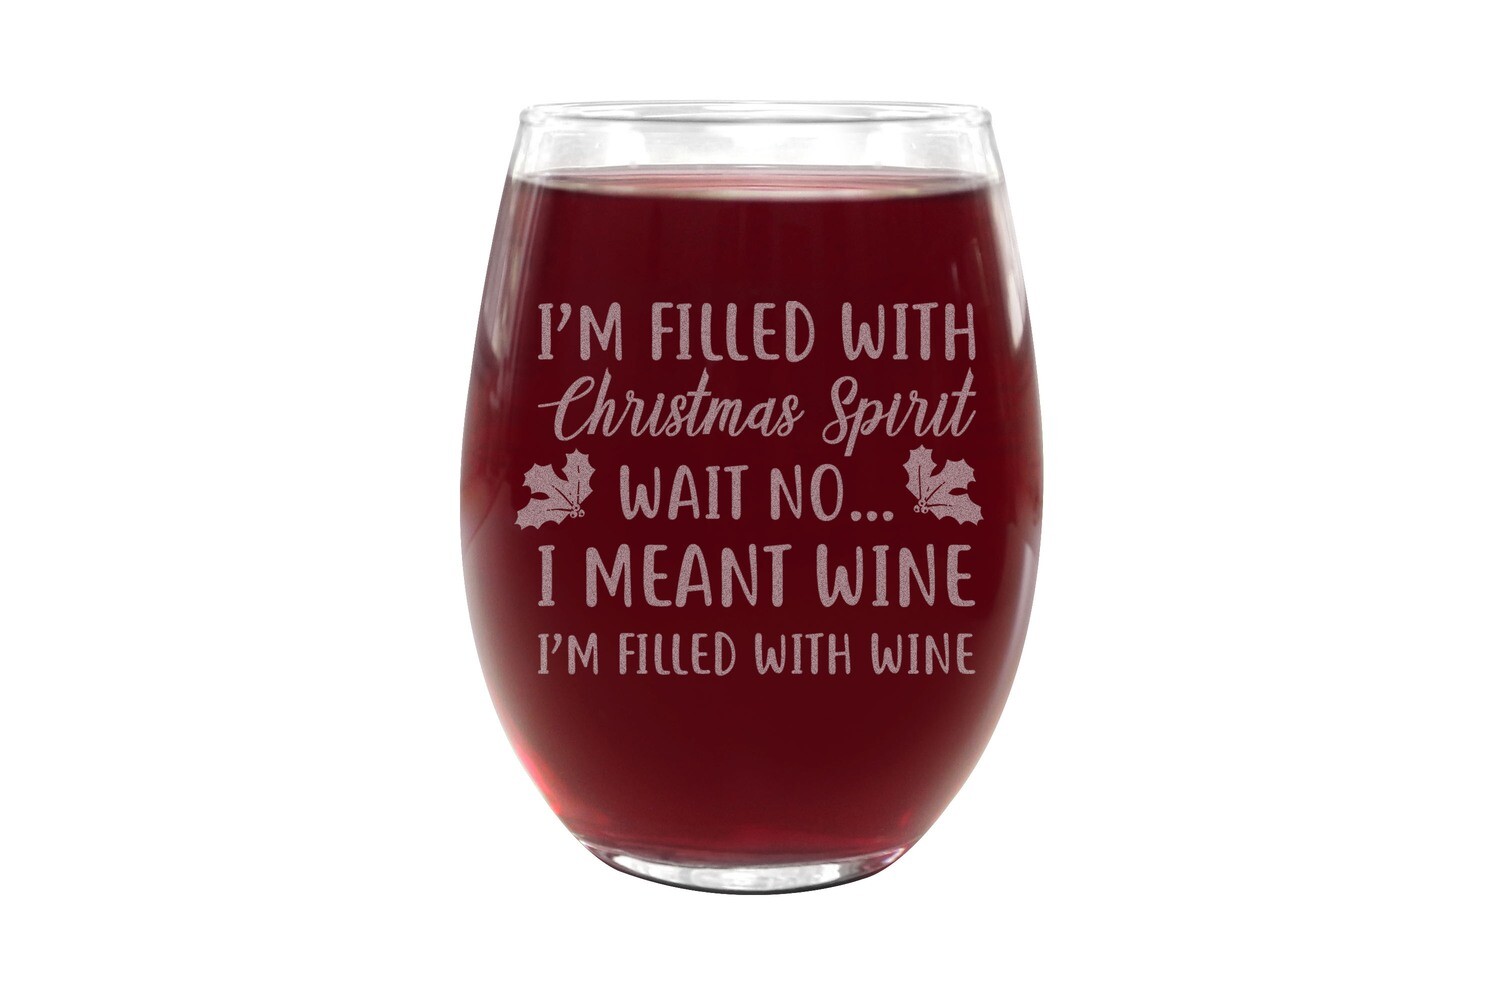 I'm Filled with Christmas Spirit Wait No... I Meant Wine Stemless Wine Glass